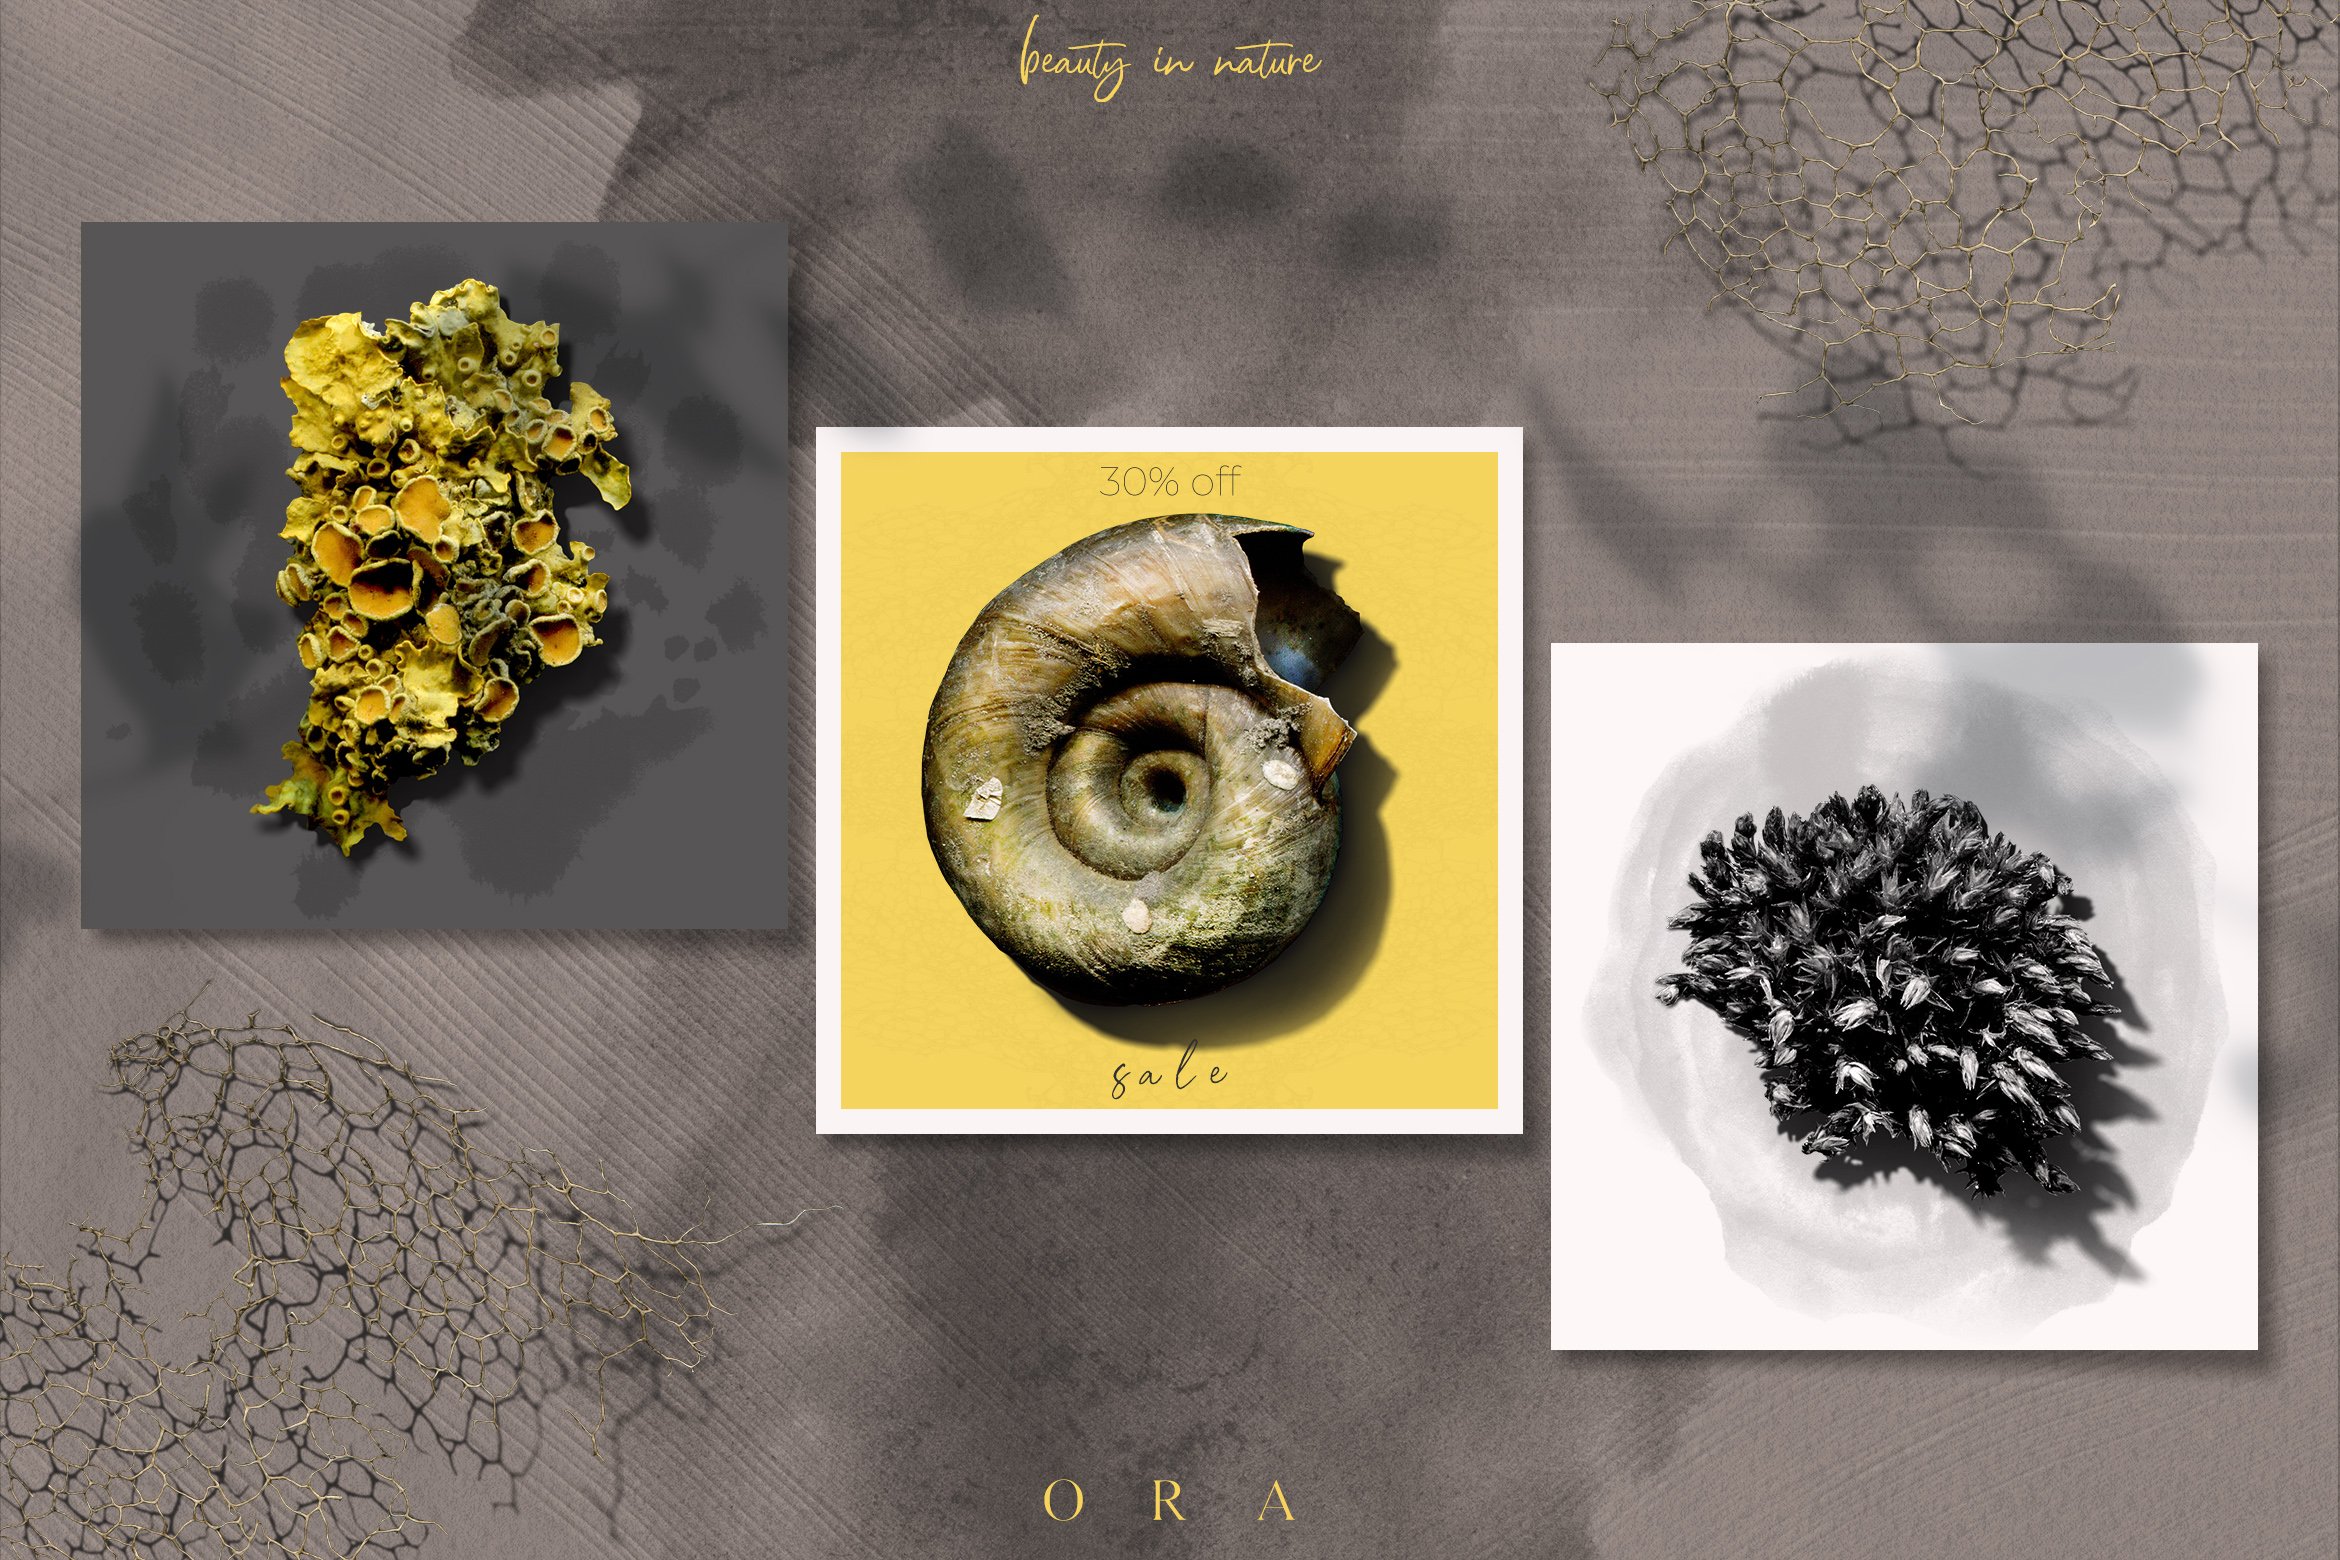 Ora - Ink & Nature Organic Graphics CollectionAesthetic style with natural objects.